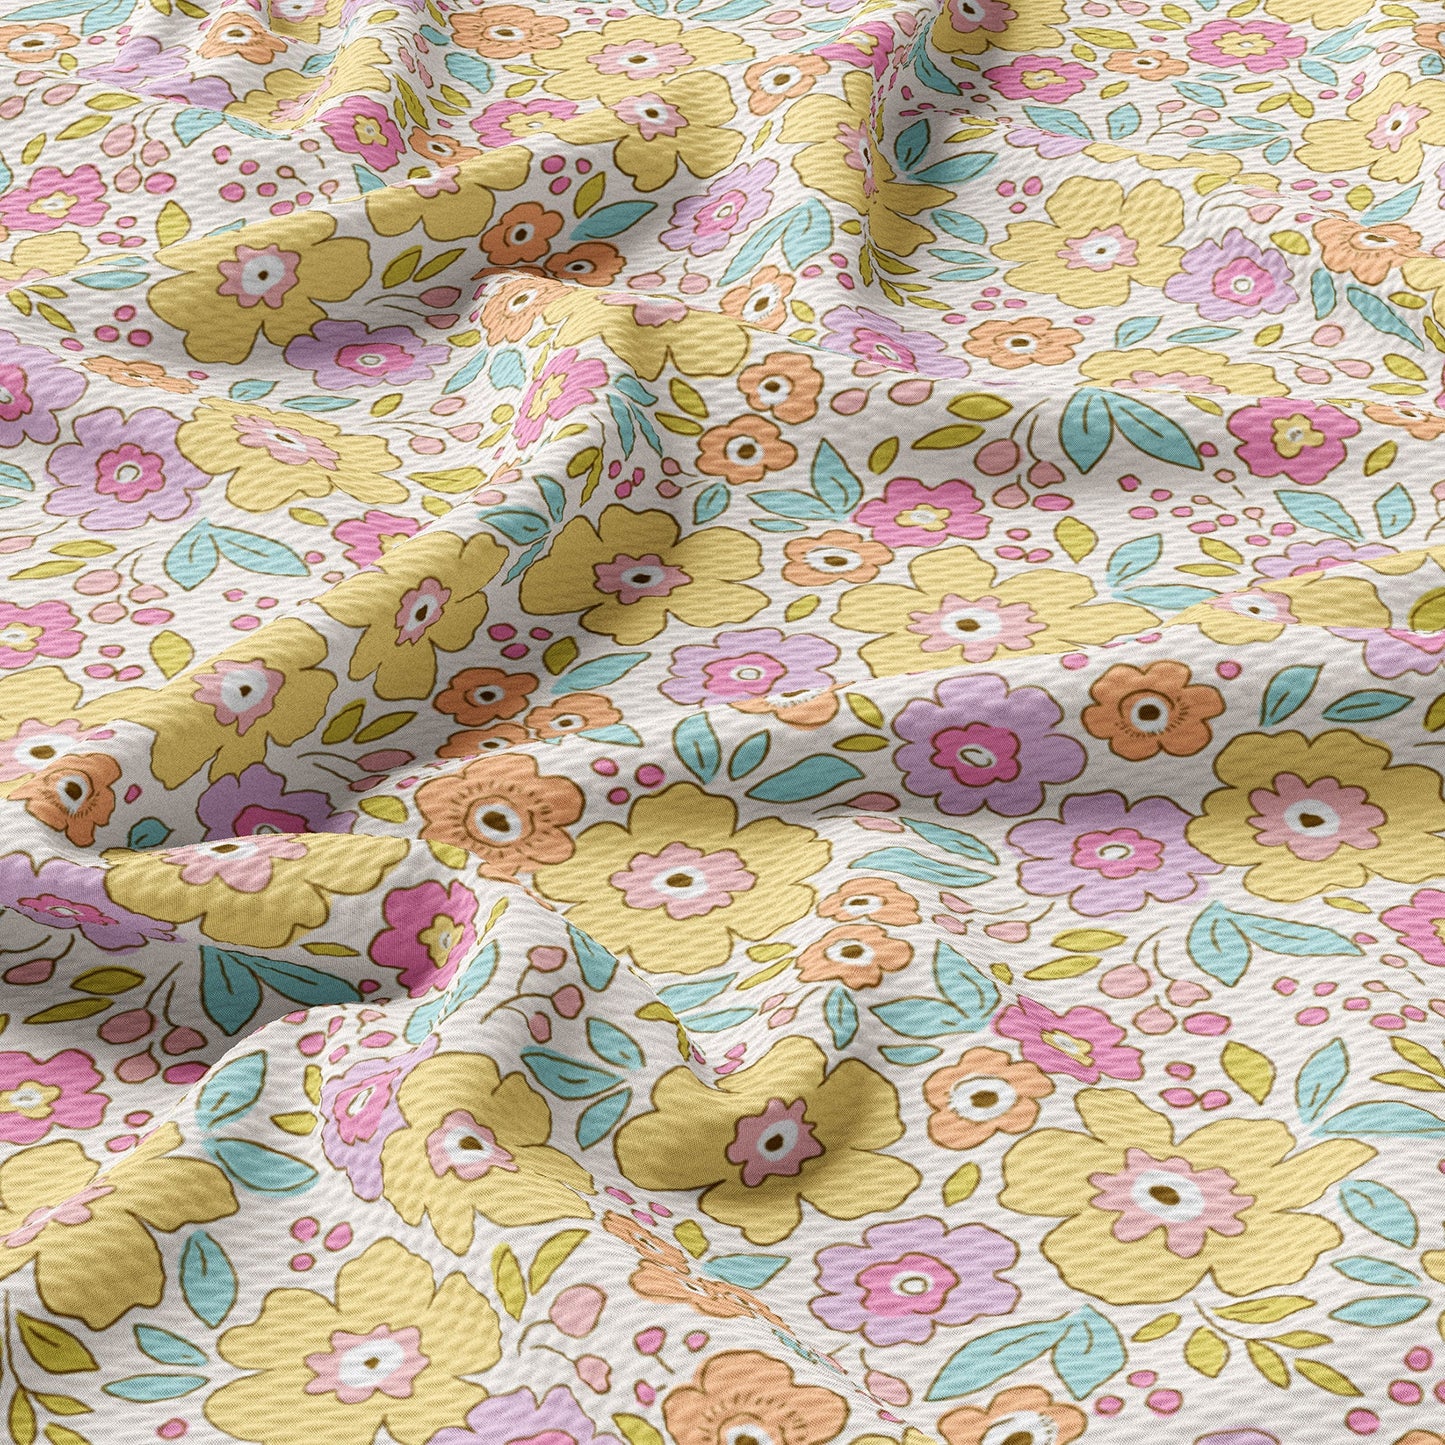 Floral  Bullet Textured Fabric by the yard AA1645